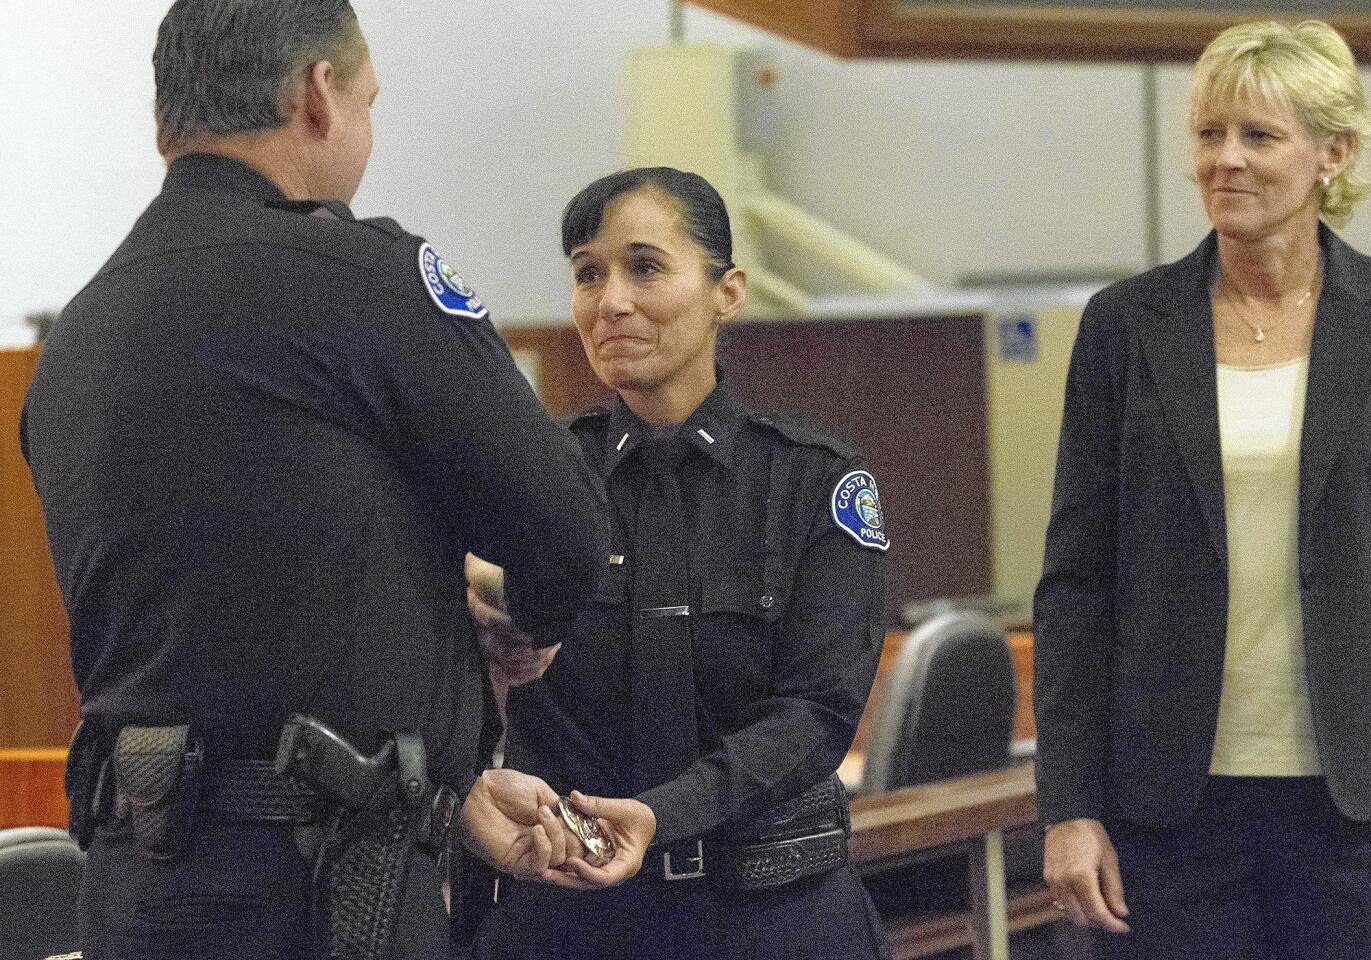 Joyce LaPointe, center, of the Costa Mesa Police Department, accompanied by her partner, Linzi Philips, right, accepts her new lieutenant badge from Police Chief Rob Sharpnack on Wednesday.